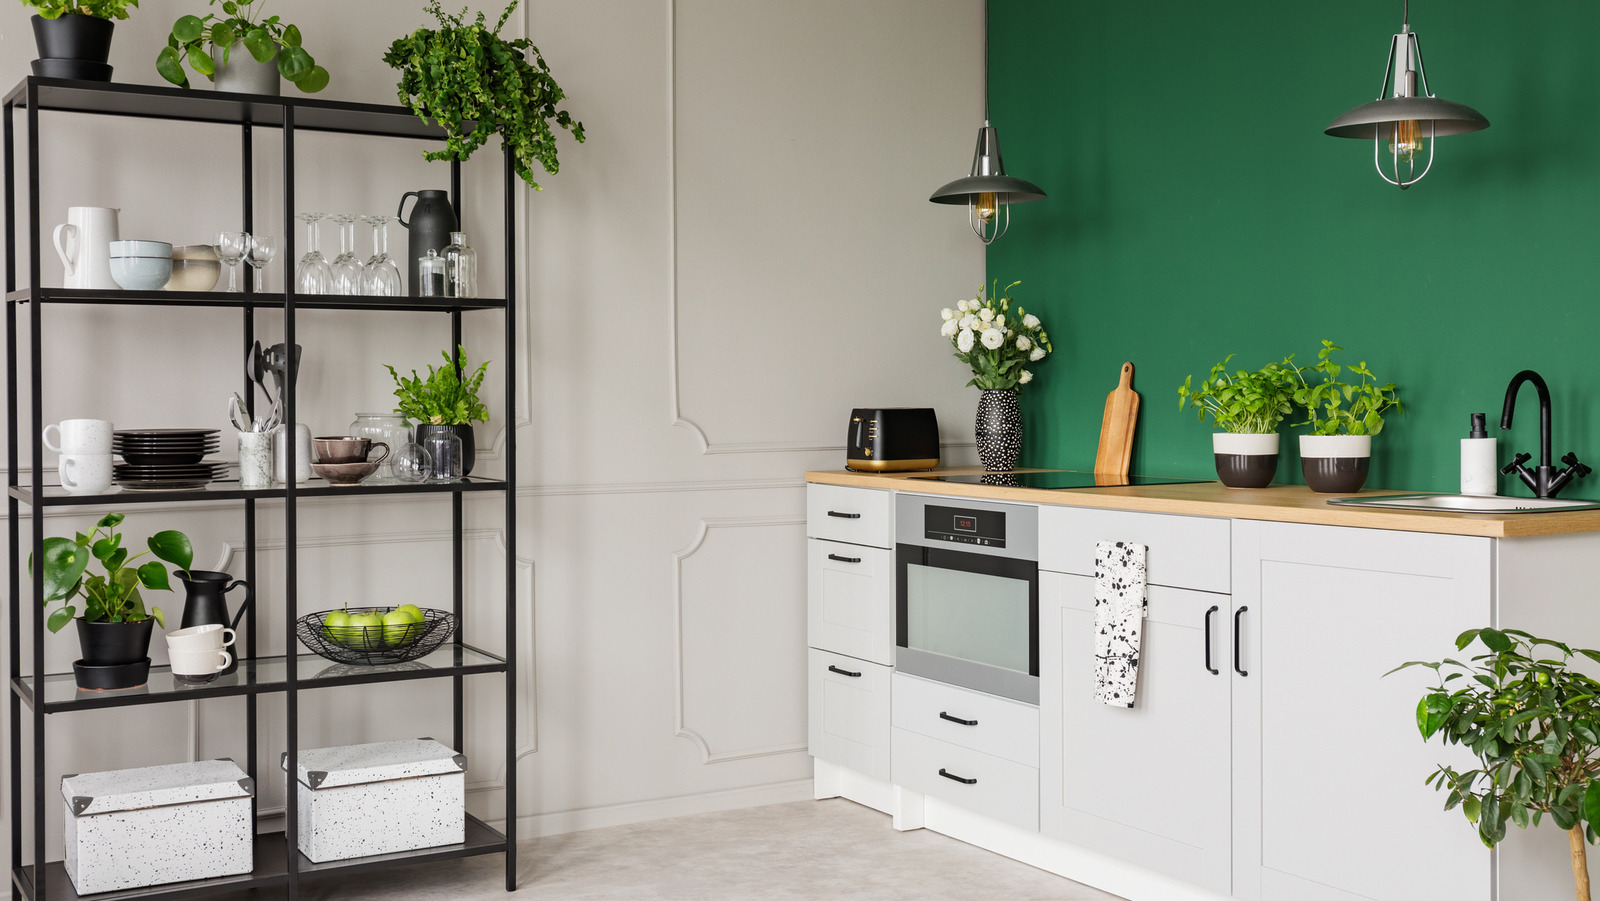 https://www.housedigest.com/img/gallery/30-beautiful-green-and-white-kitchen-ideas-to-make-the-most-of-this-classic-color-combination/l-intro-1664871284.jpg